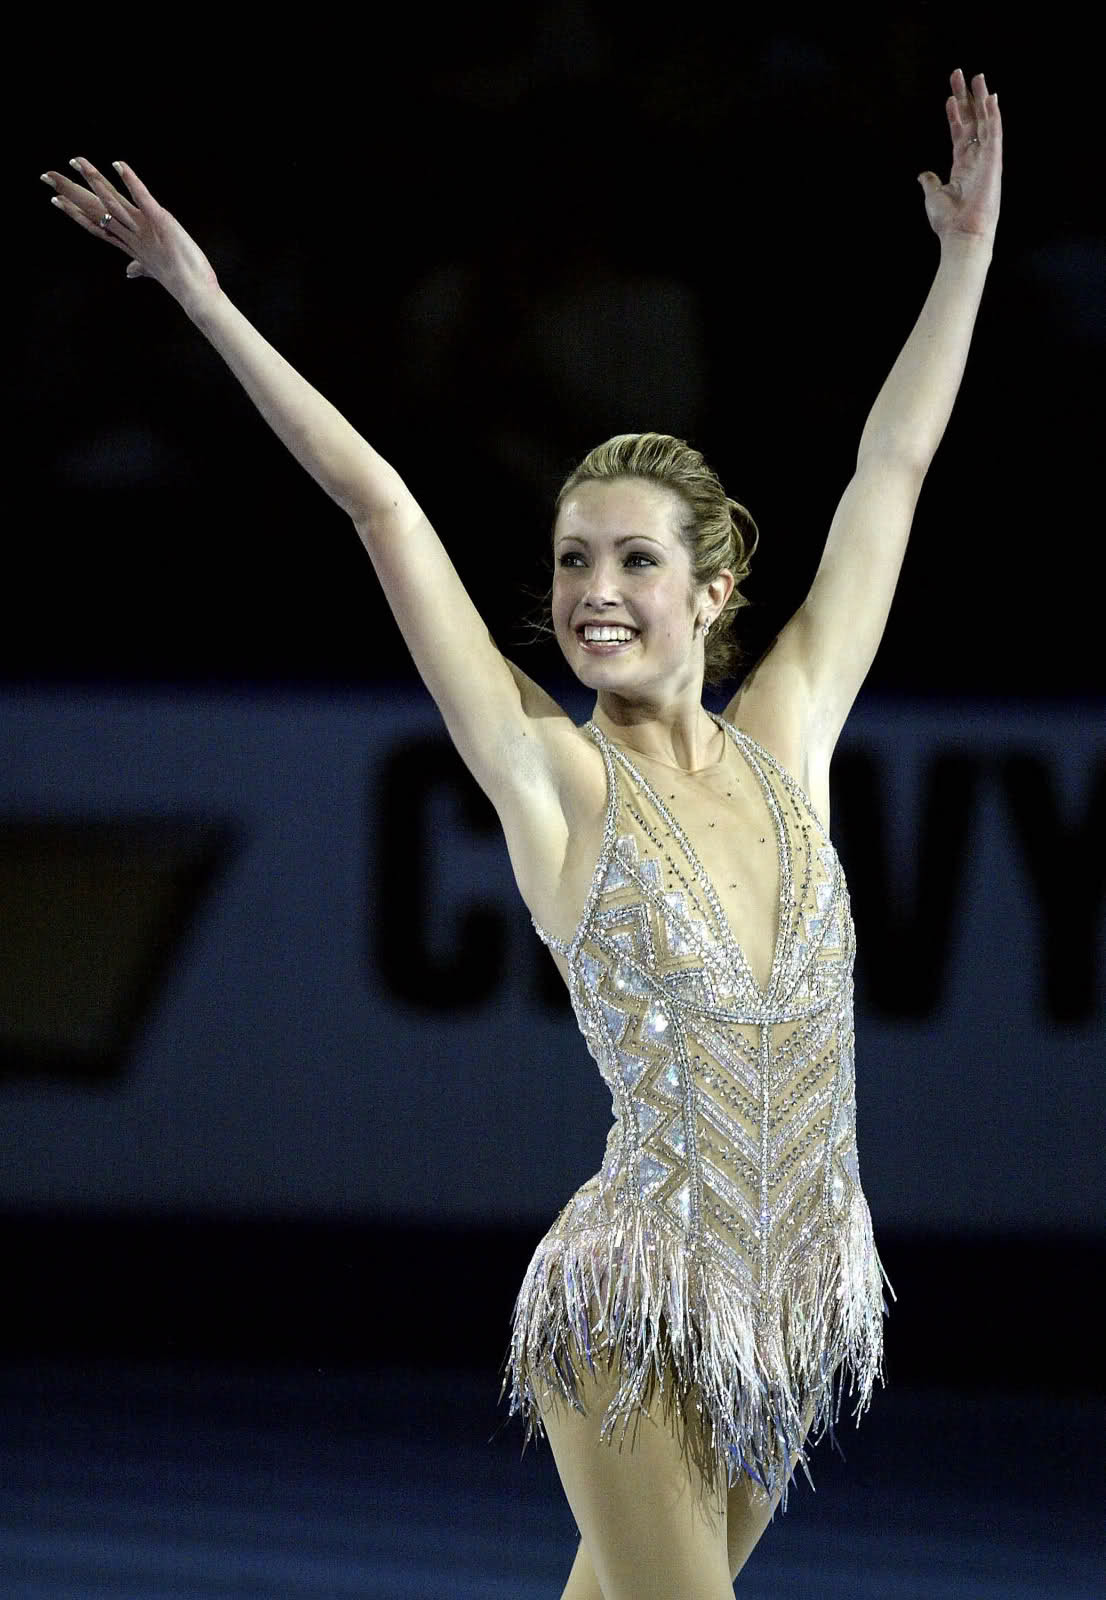 Certainly, Jenny Kirk made a name for herself as an accomplished figure skater.